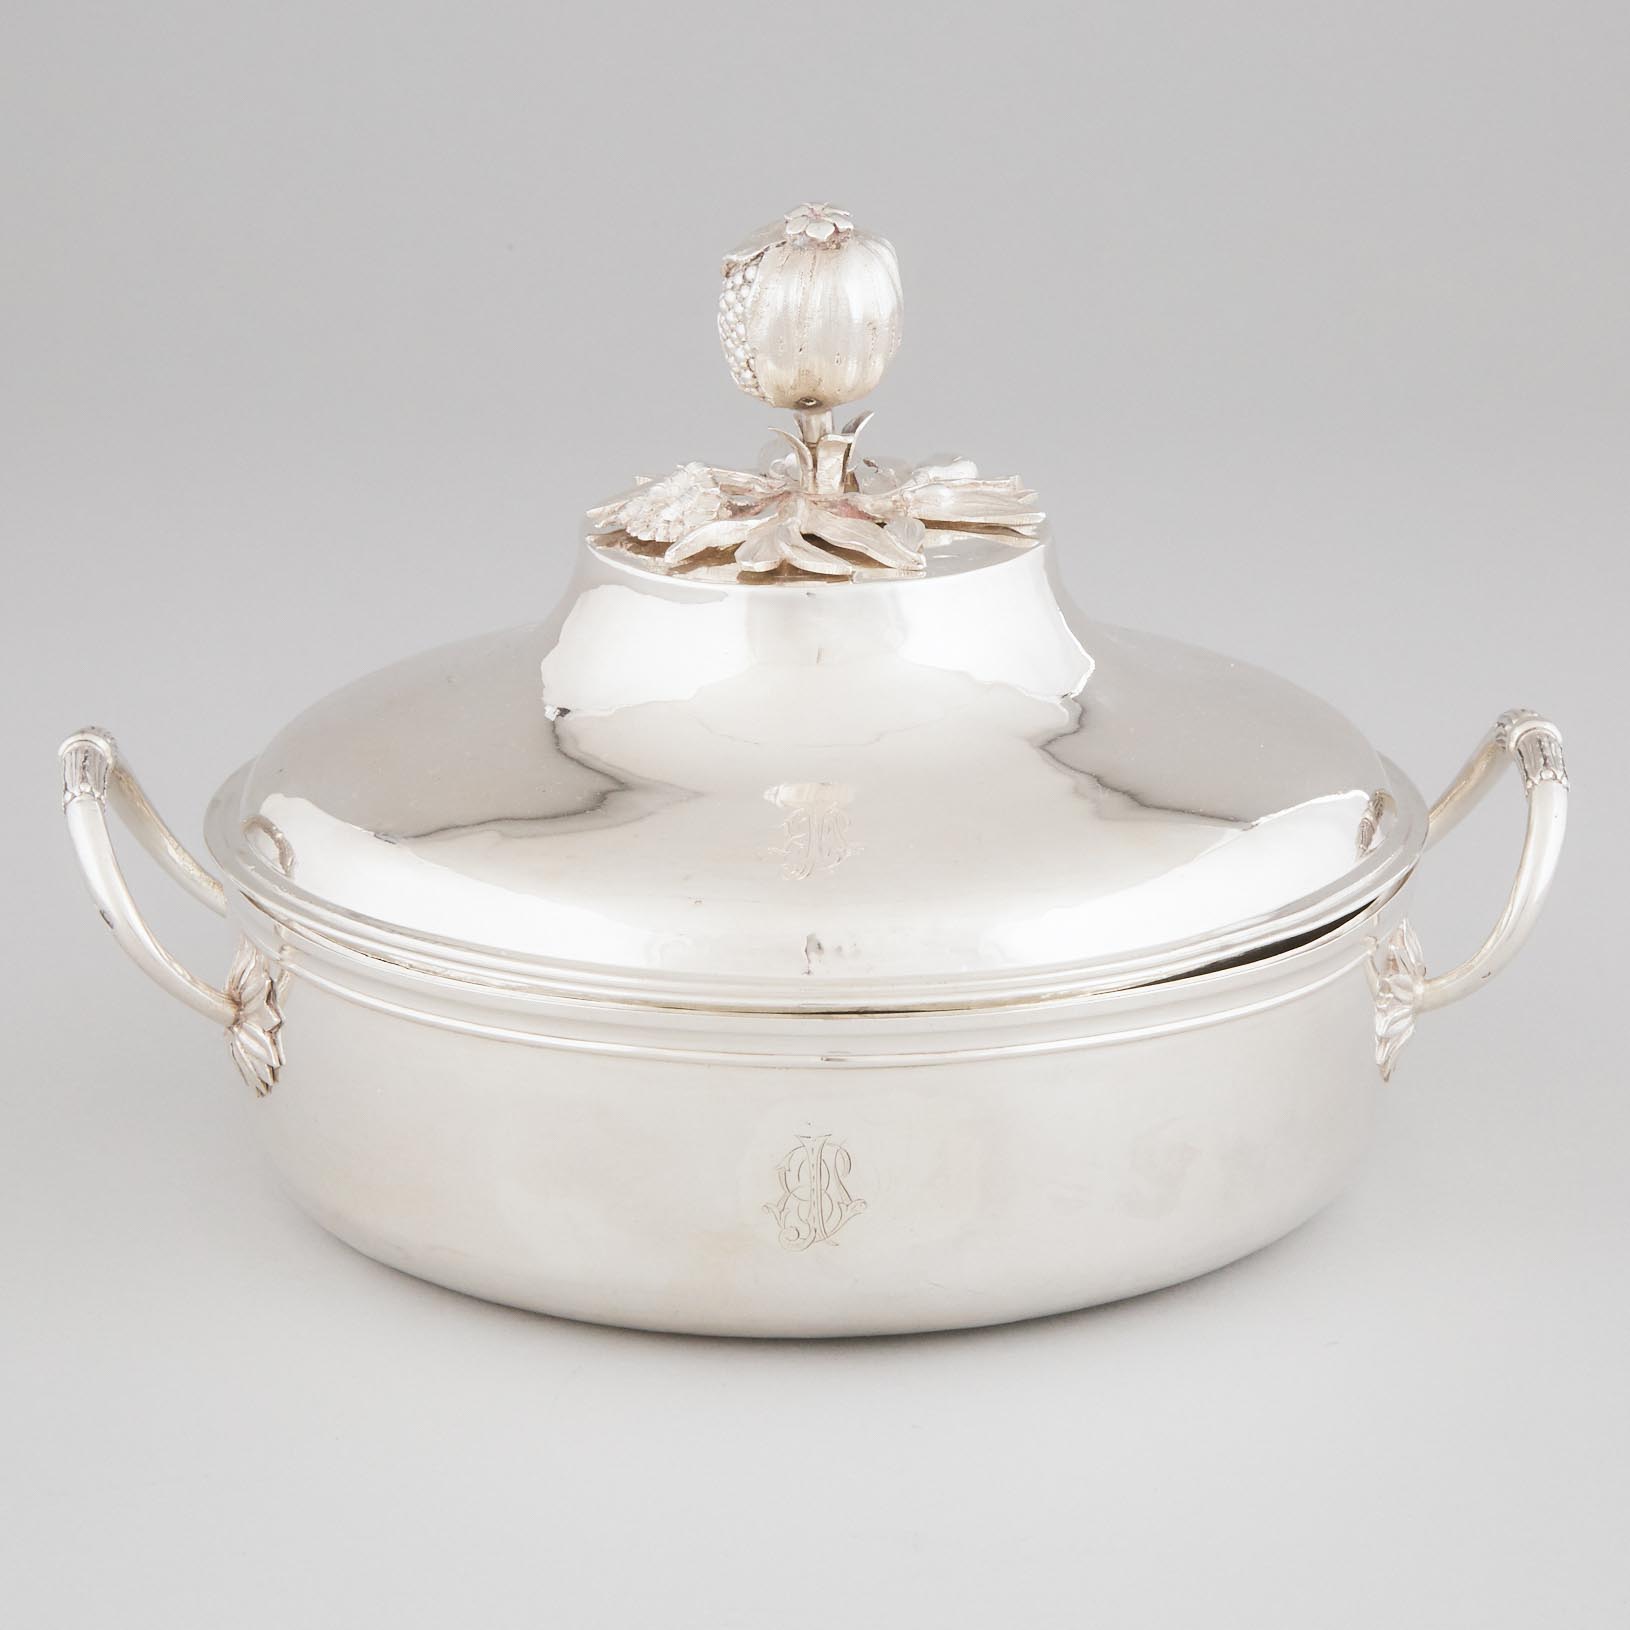 French Silver Two-Handled Tureen and Cover, Paris, early 19th century